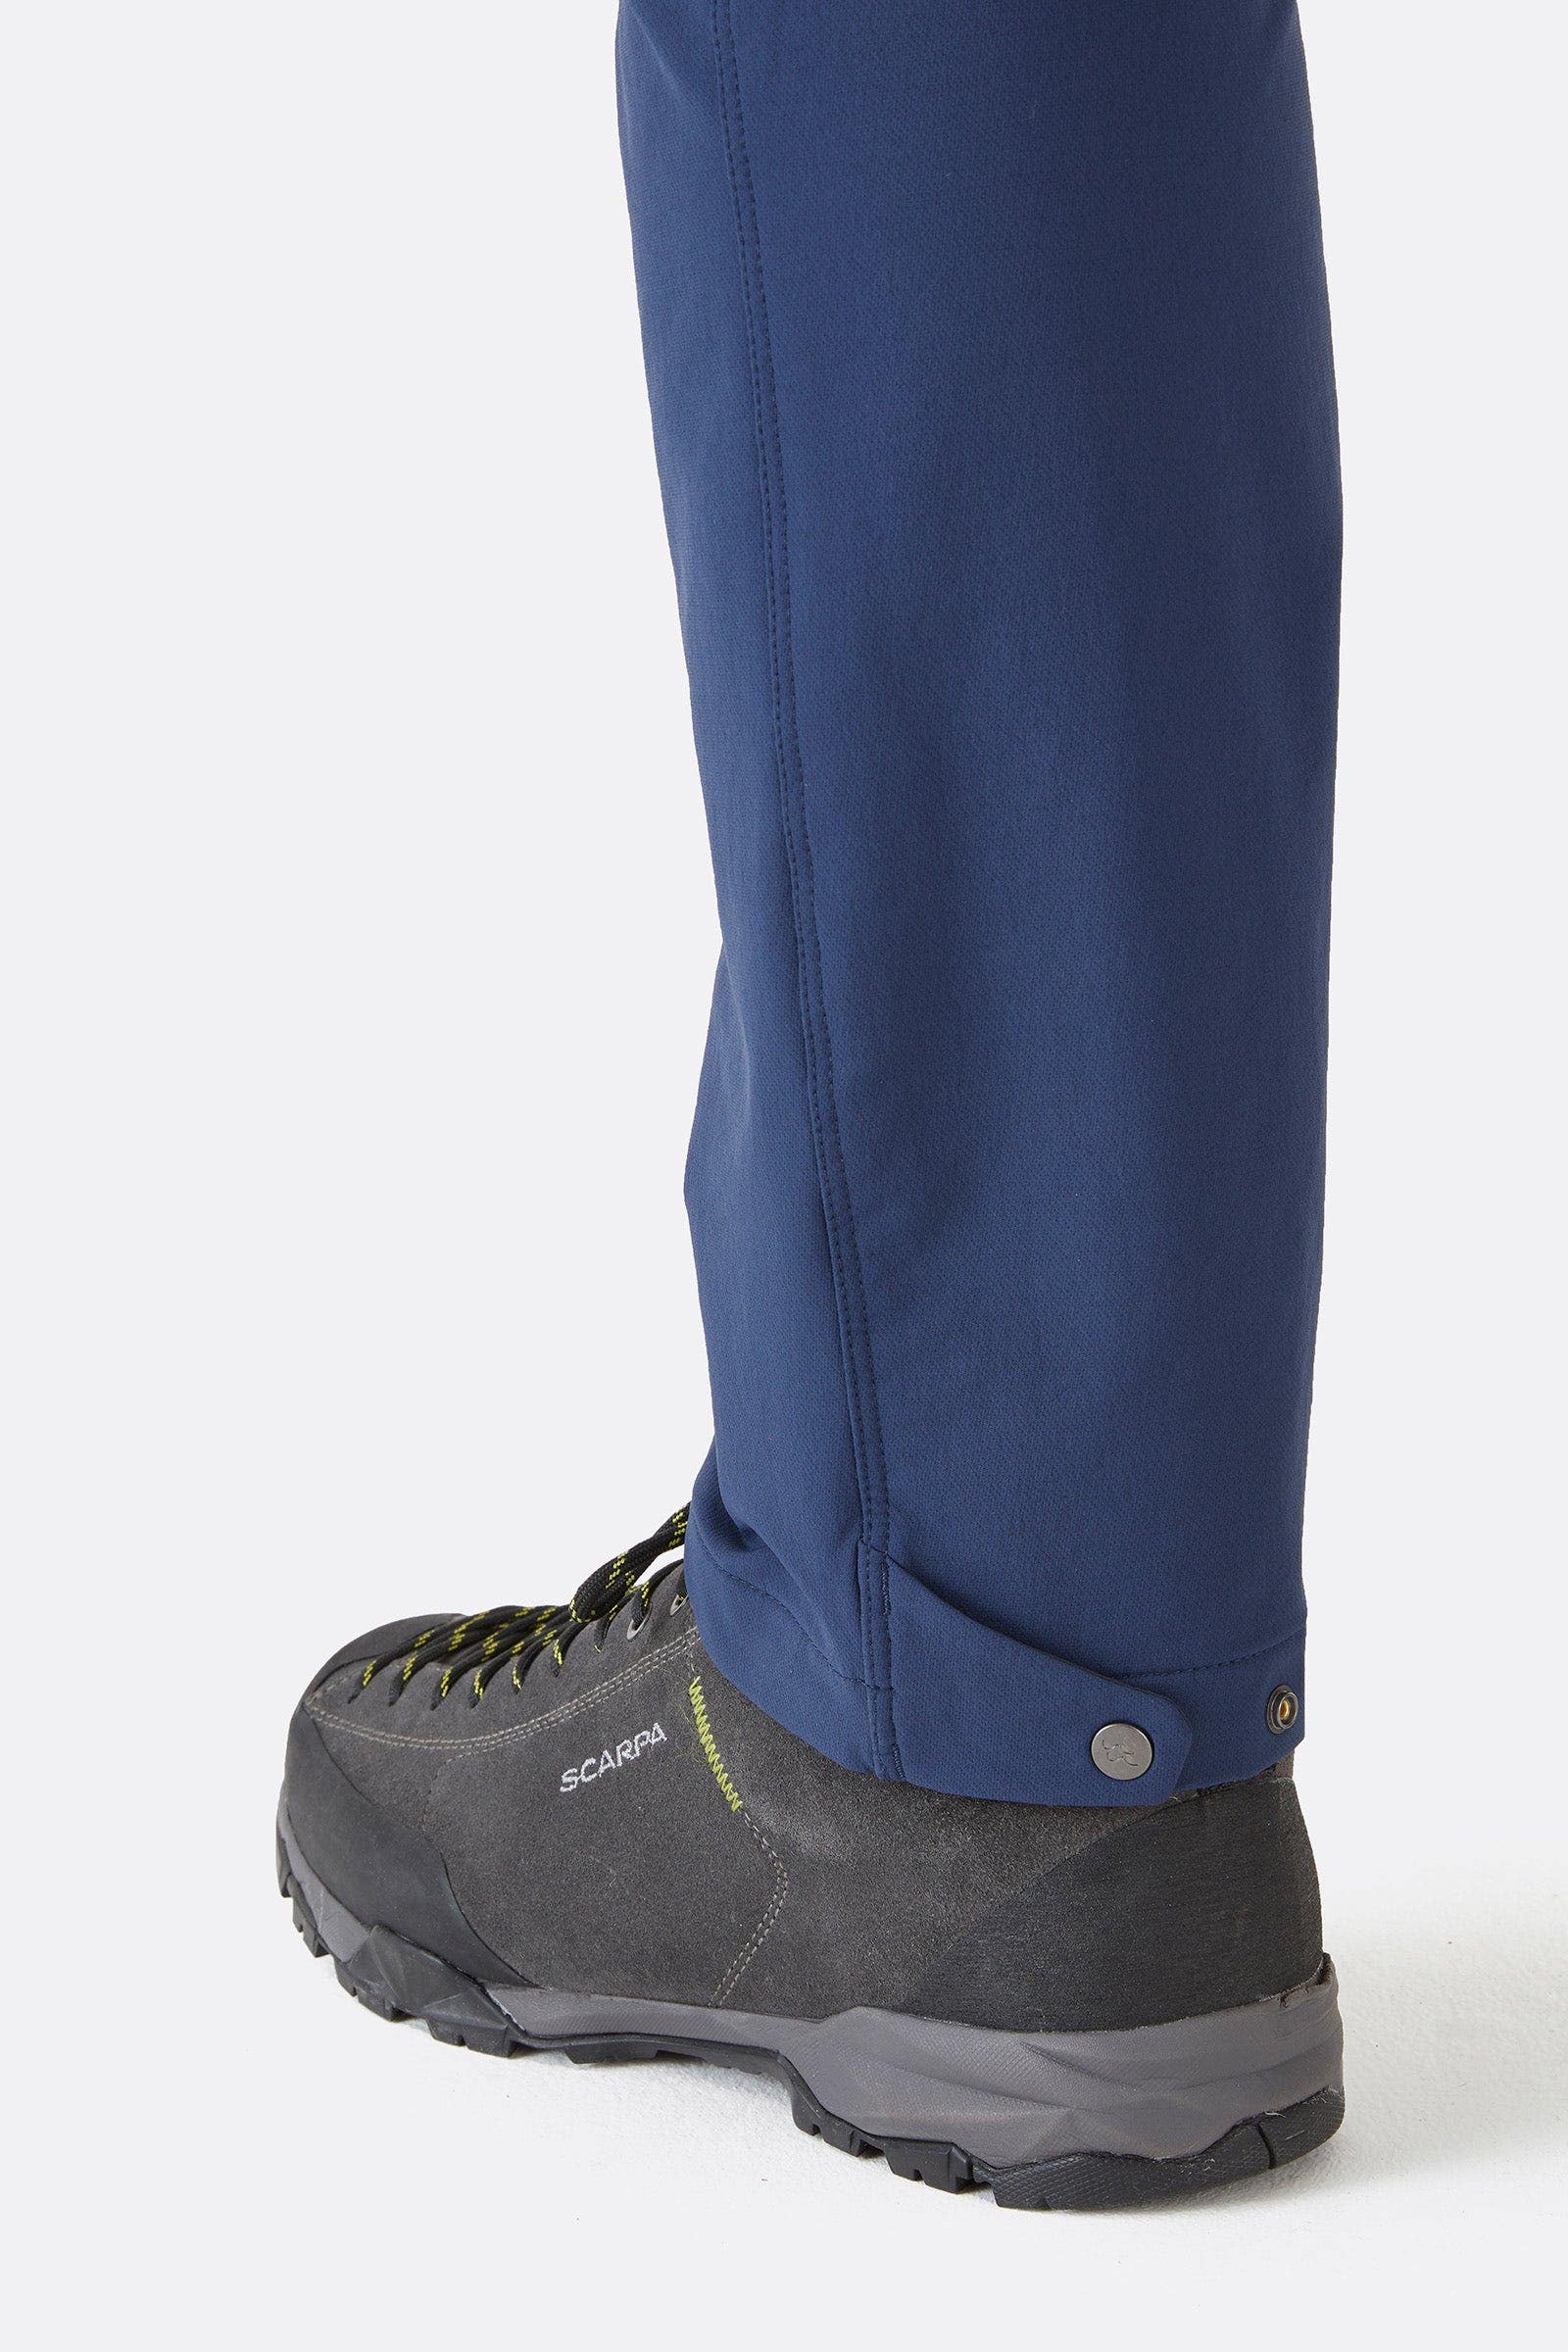 Men's Incline AS Softshell Pants 